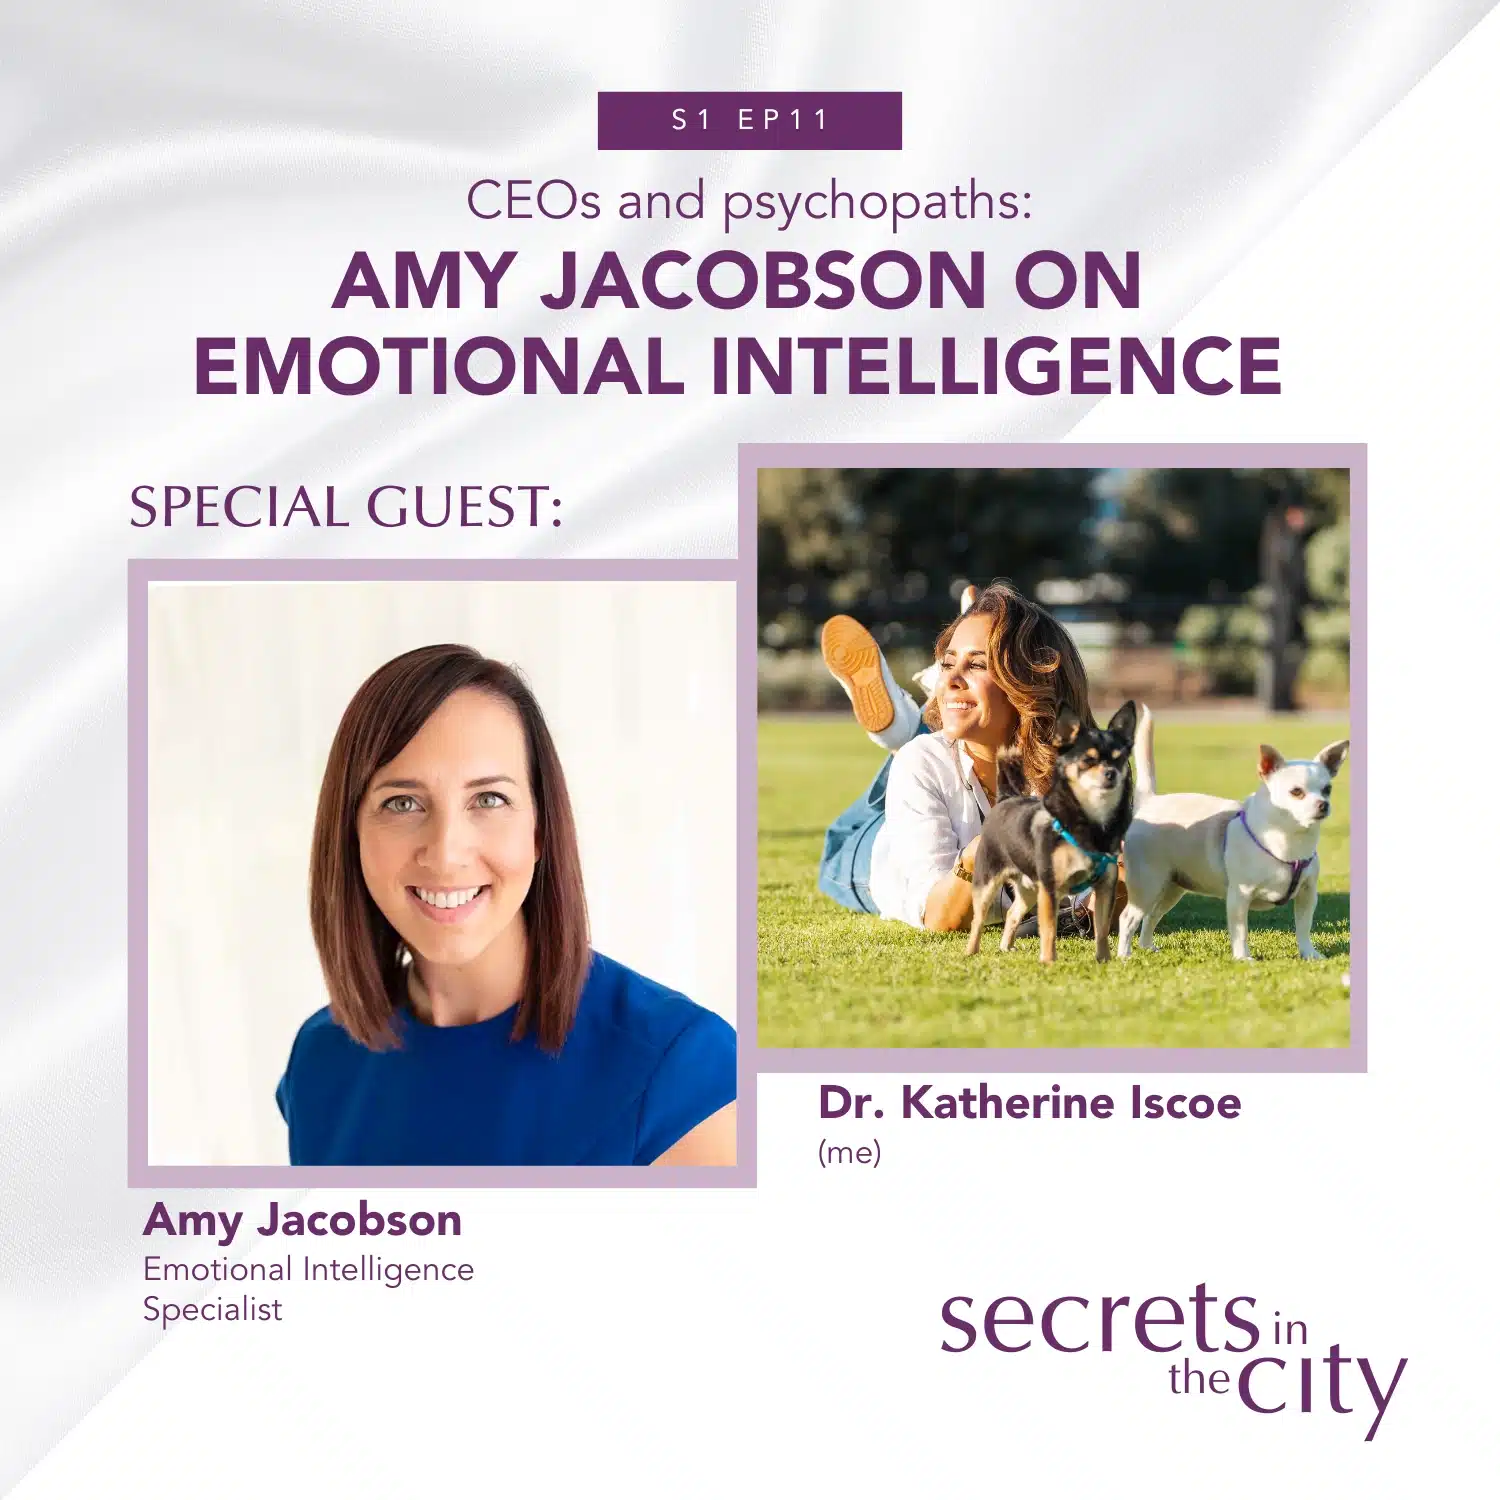 CEOs and psychopaths: Amy Jacobson on Emotional Intelligence